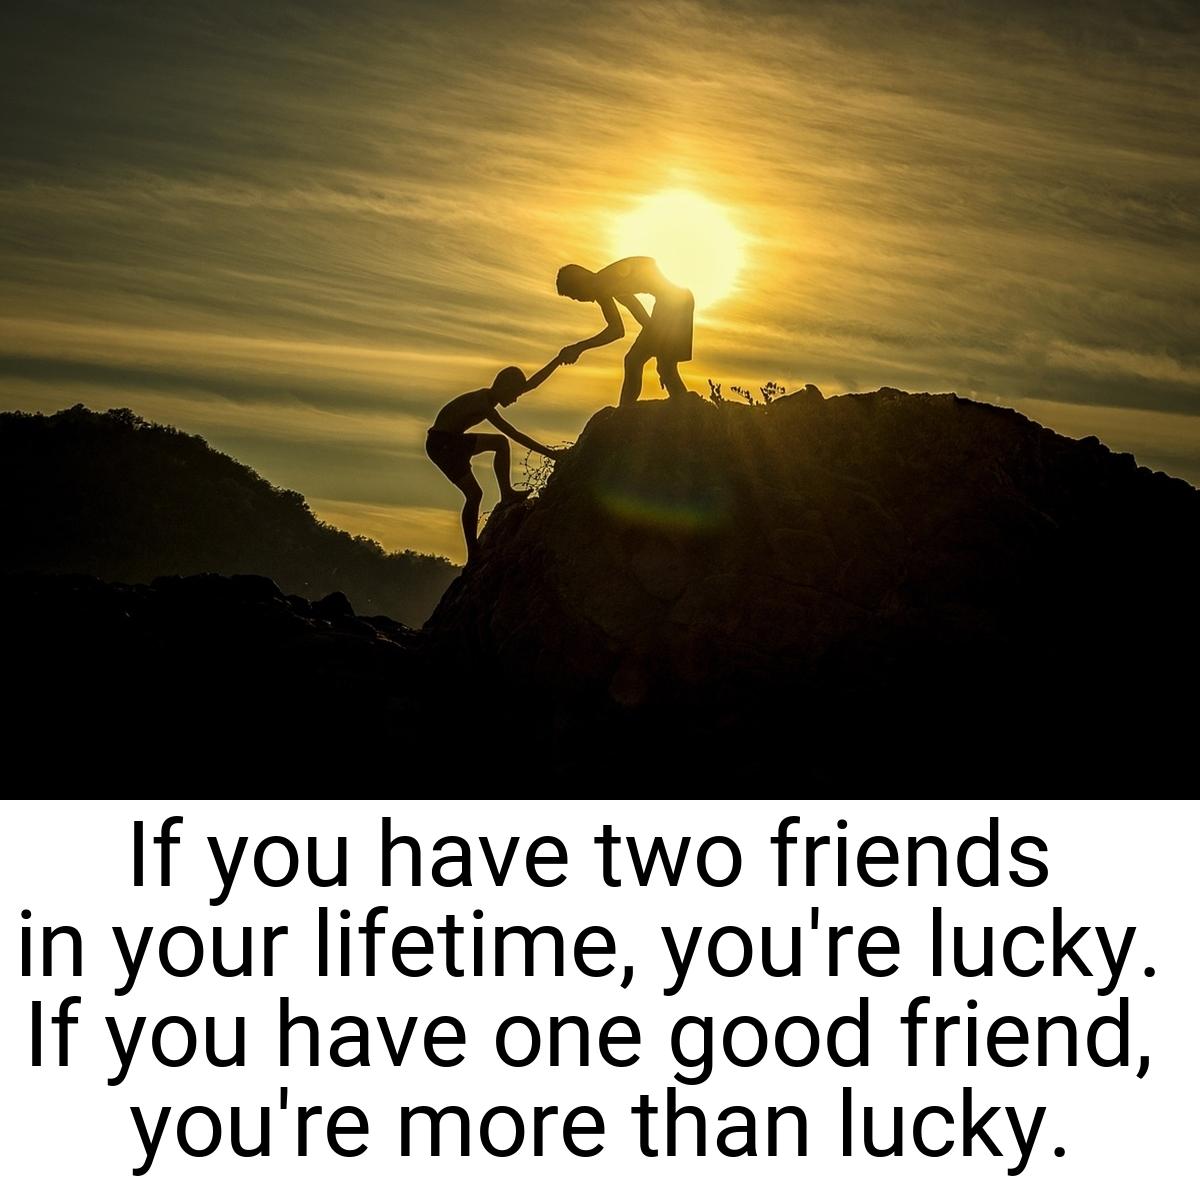 If you have two friends in your lifetime, you're lucky. If